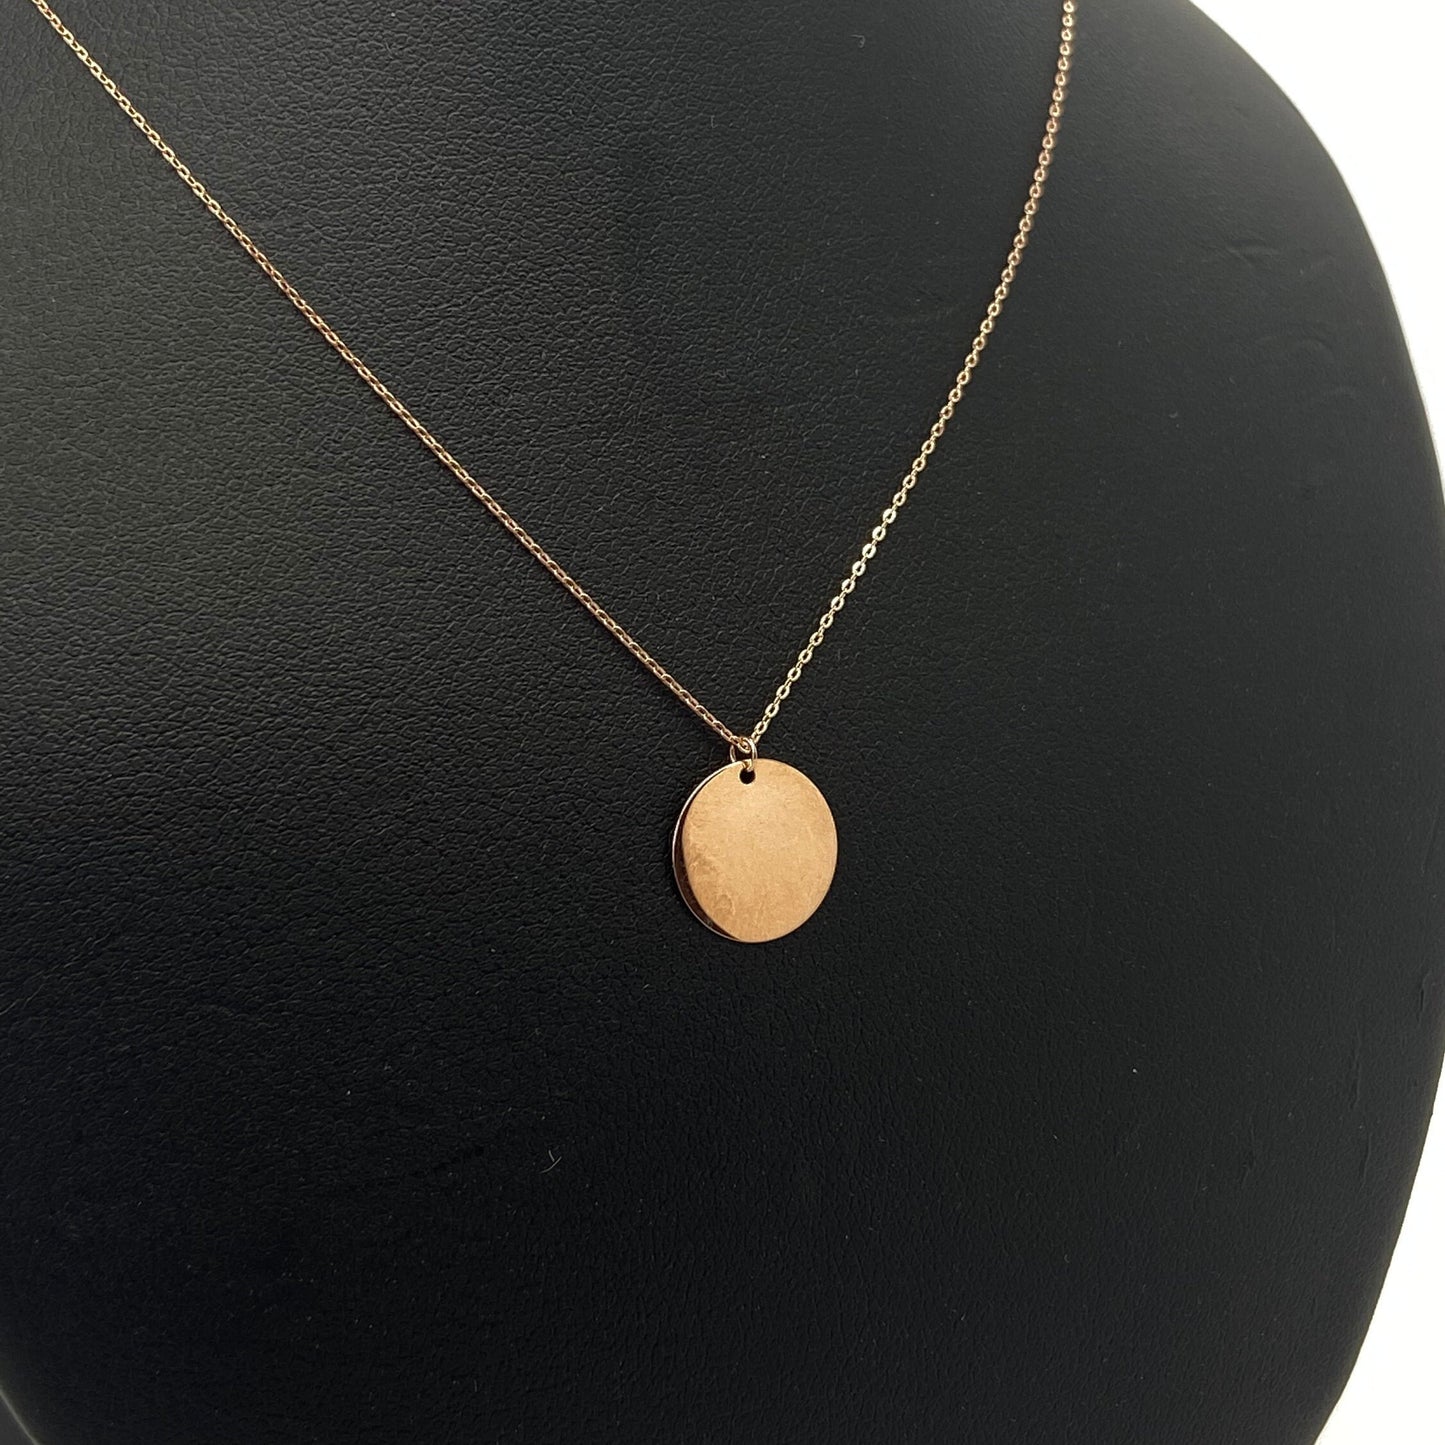 Rose Gold Round Disk Dangle Pendant Chain Necklace